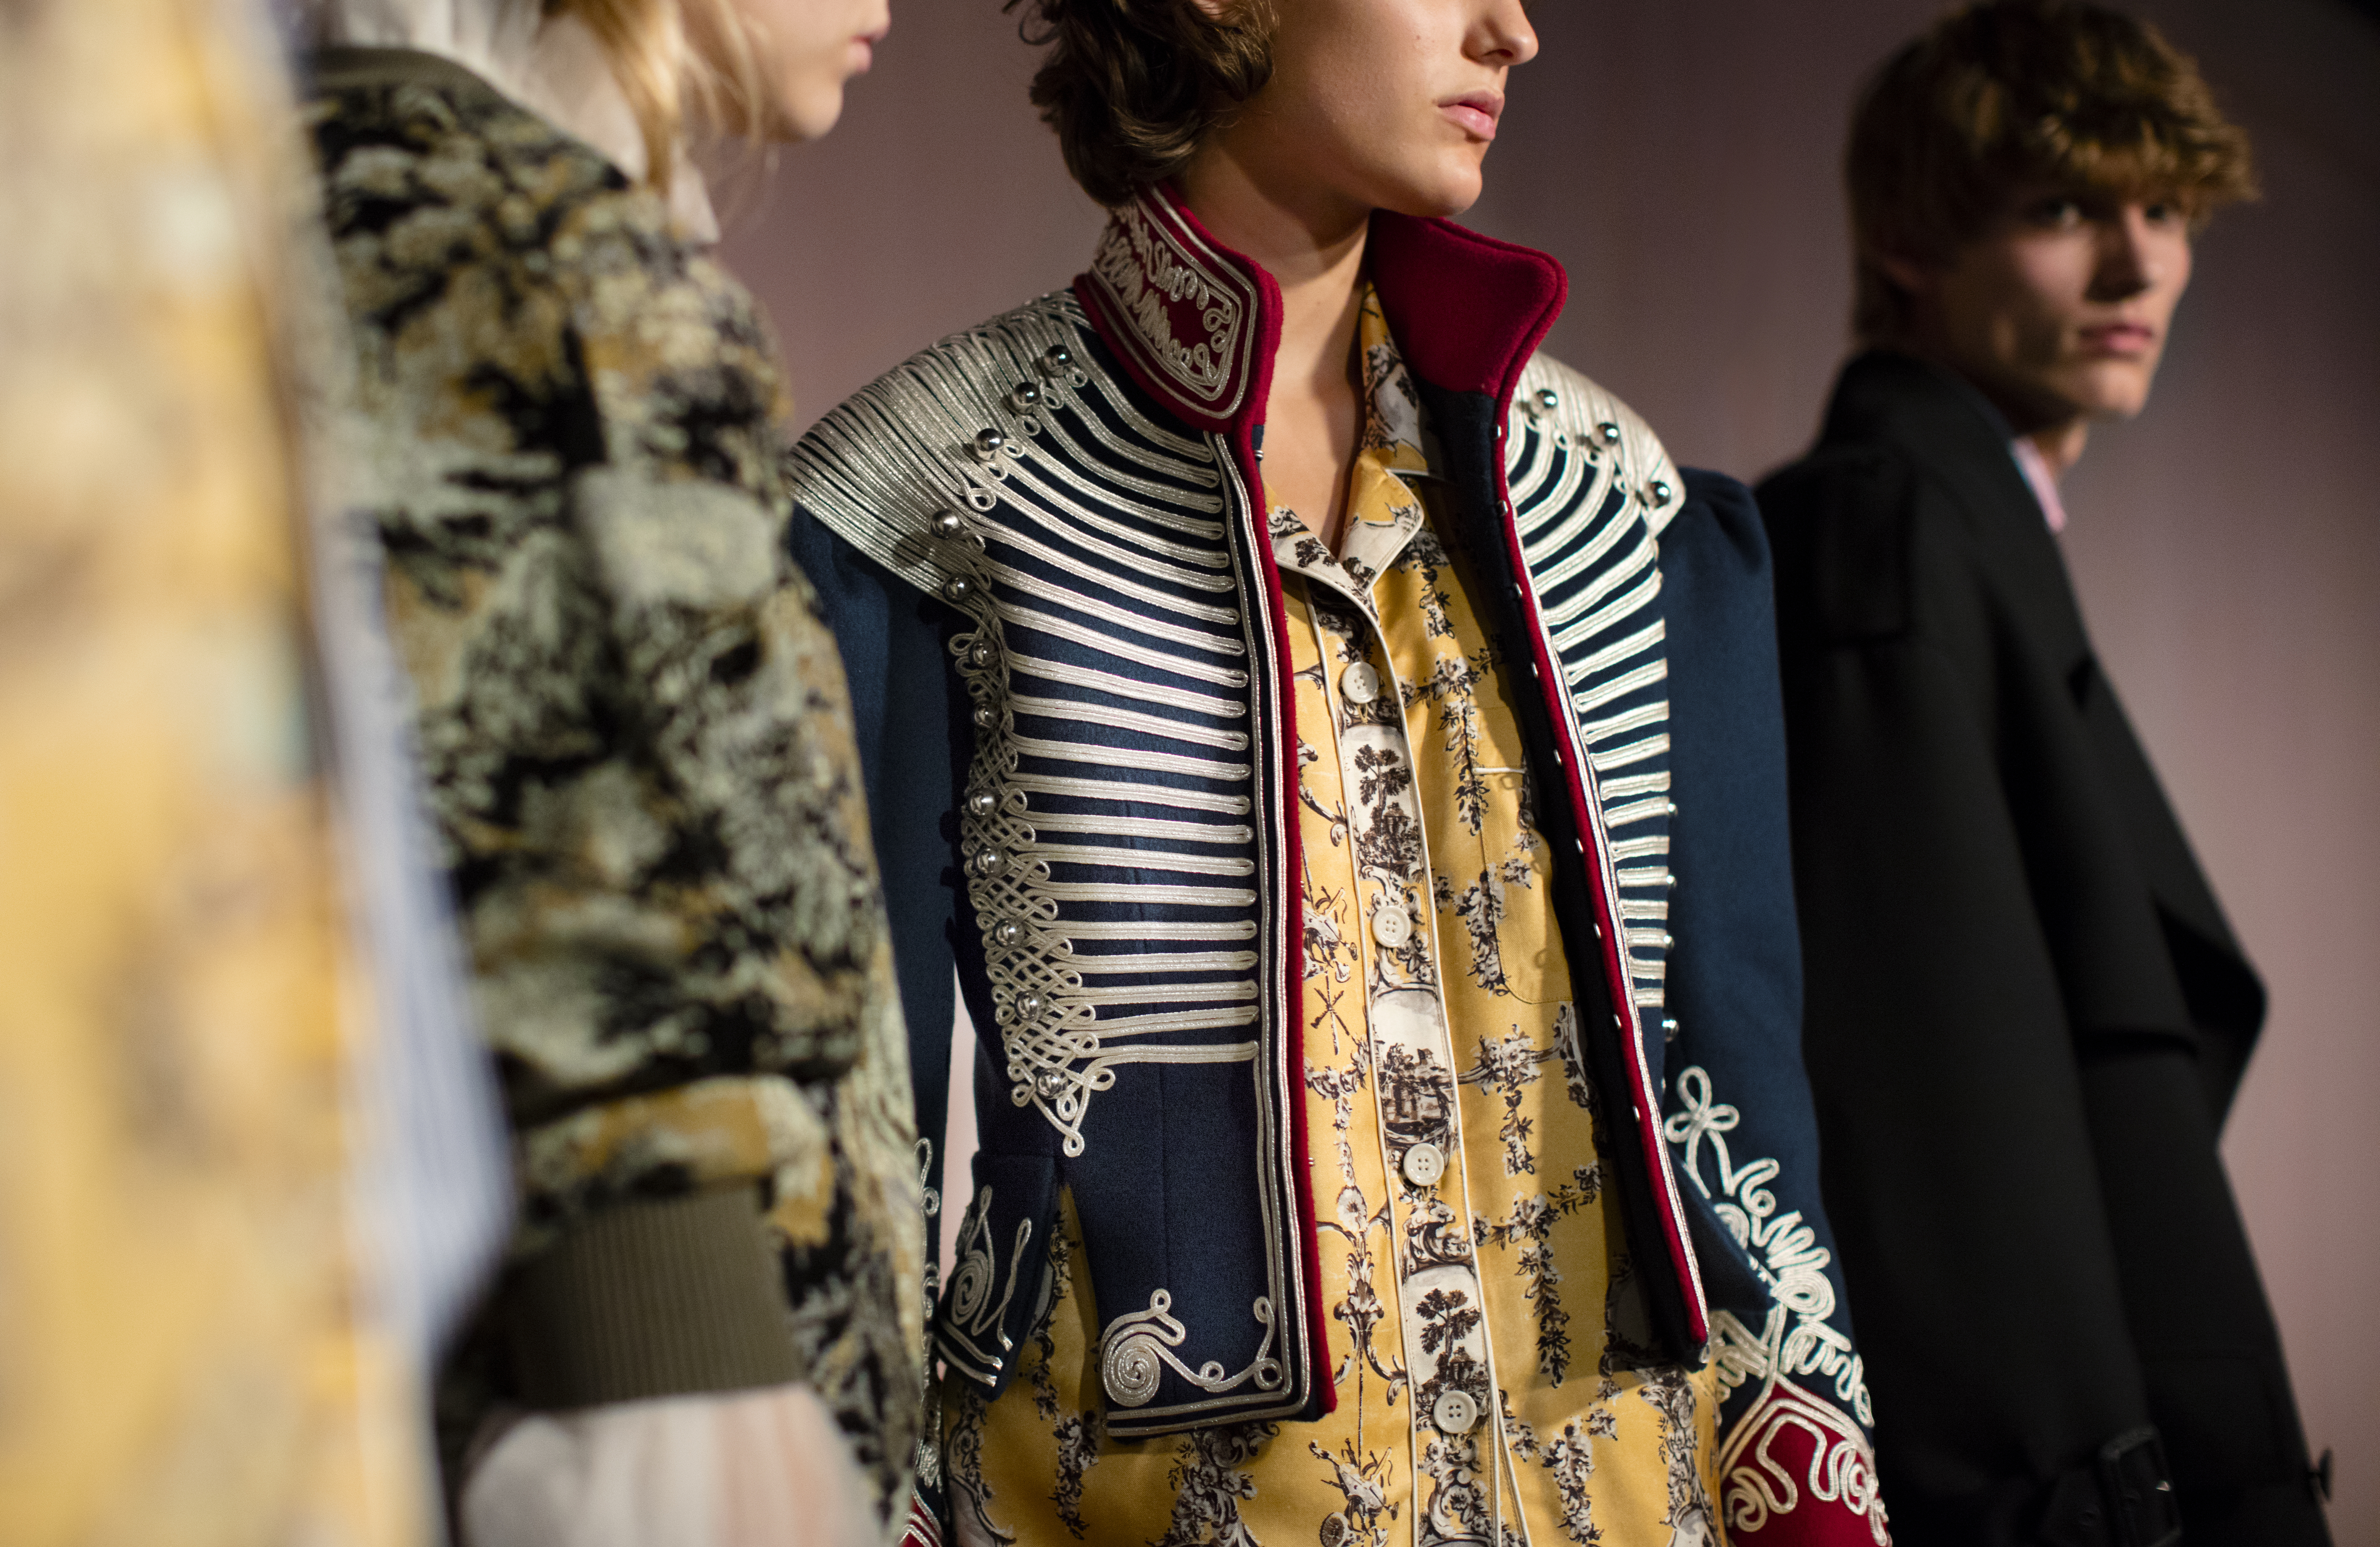 Burberry’s September collection was available for purchase immediately after the show